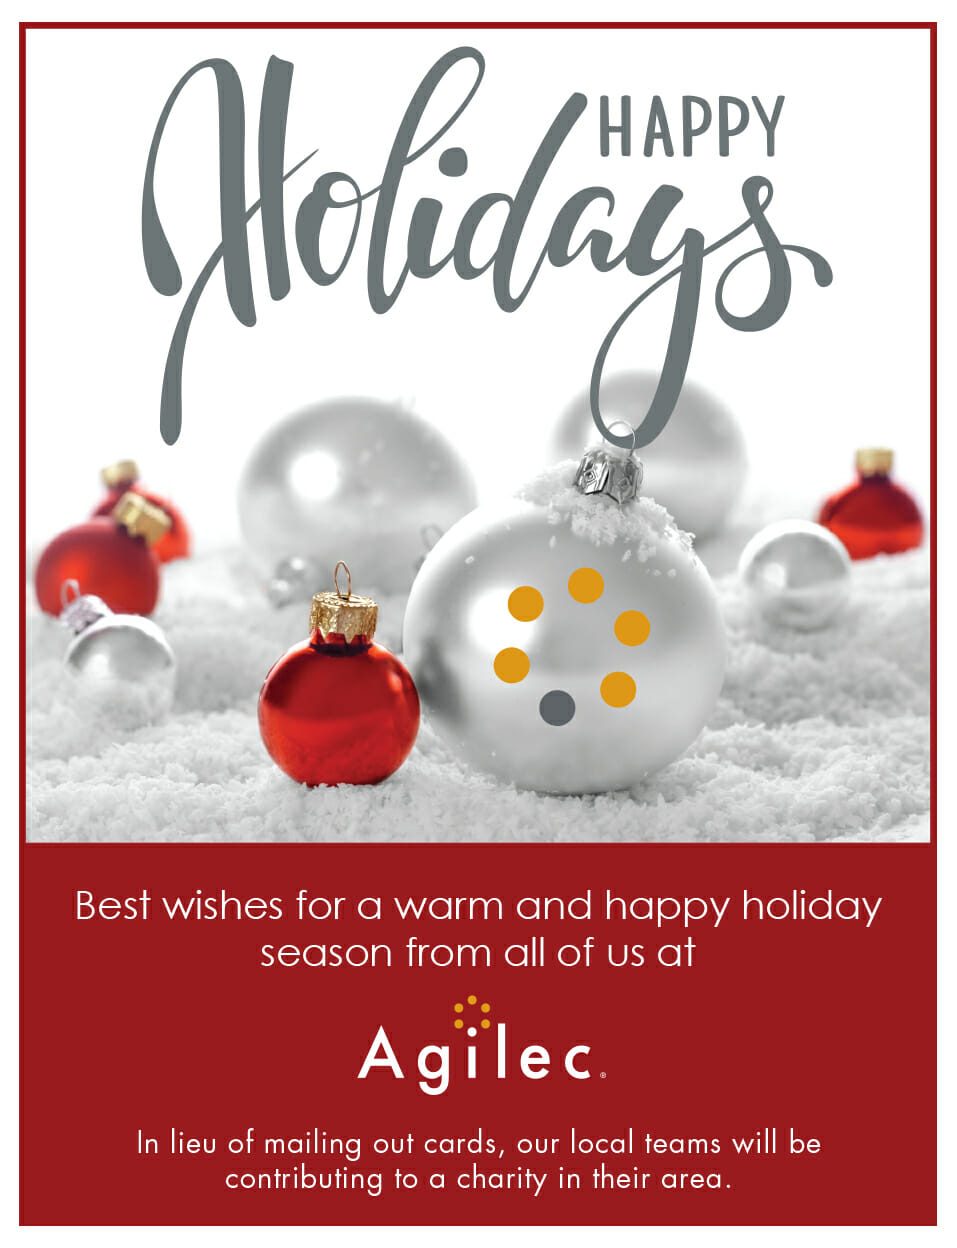 Happy holidays from all of us at Agilec